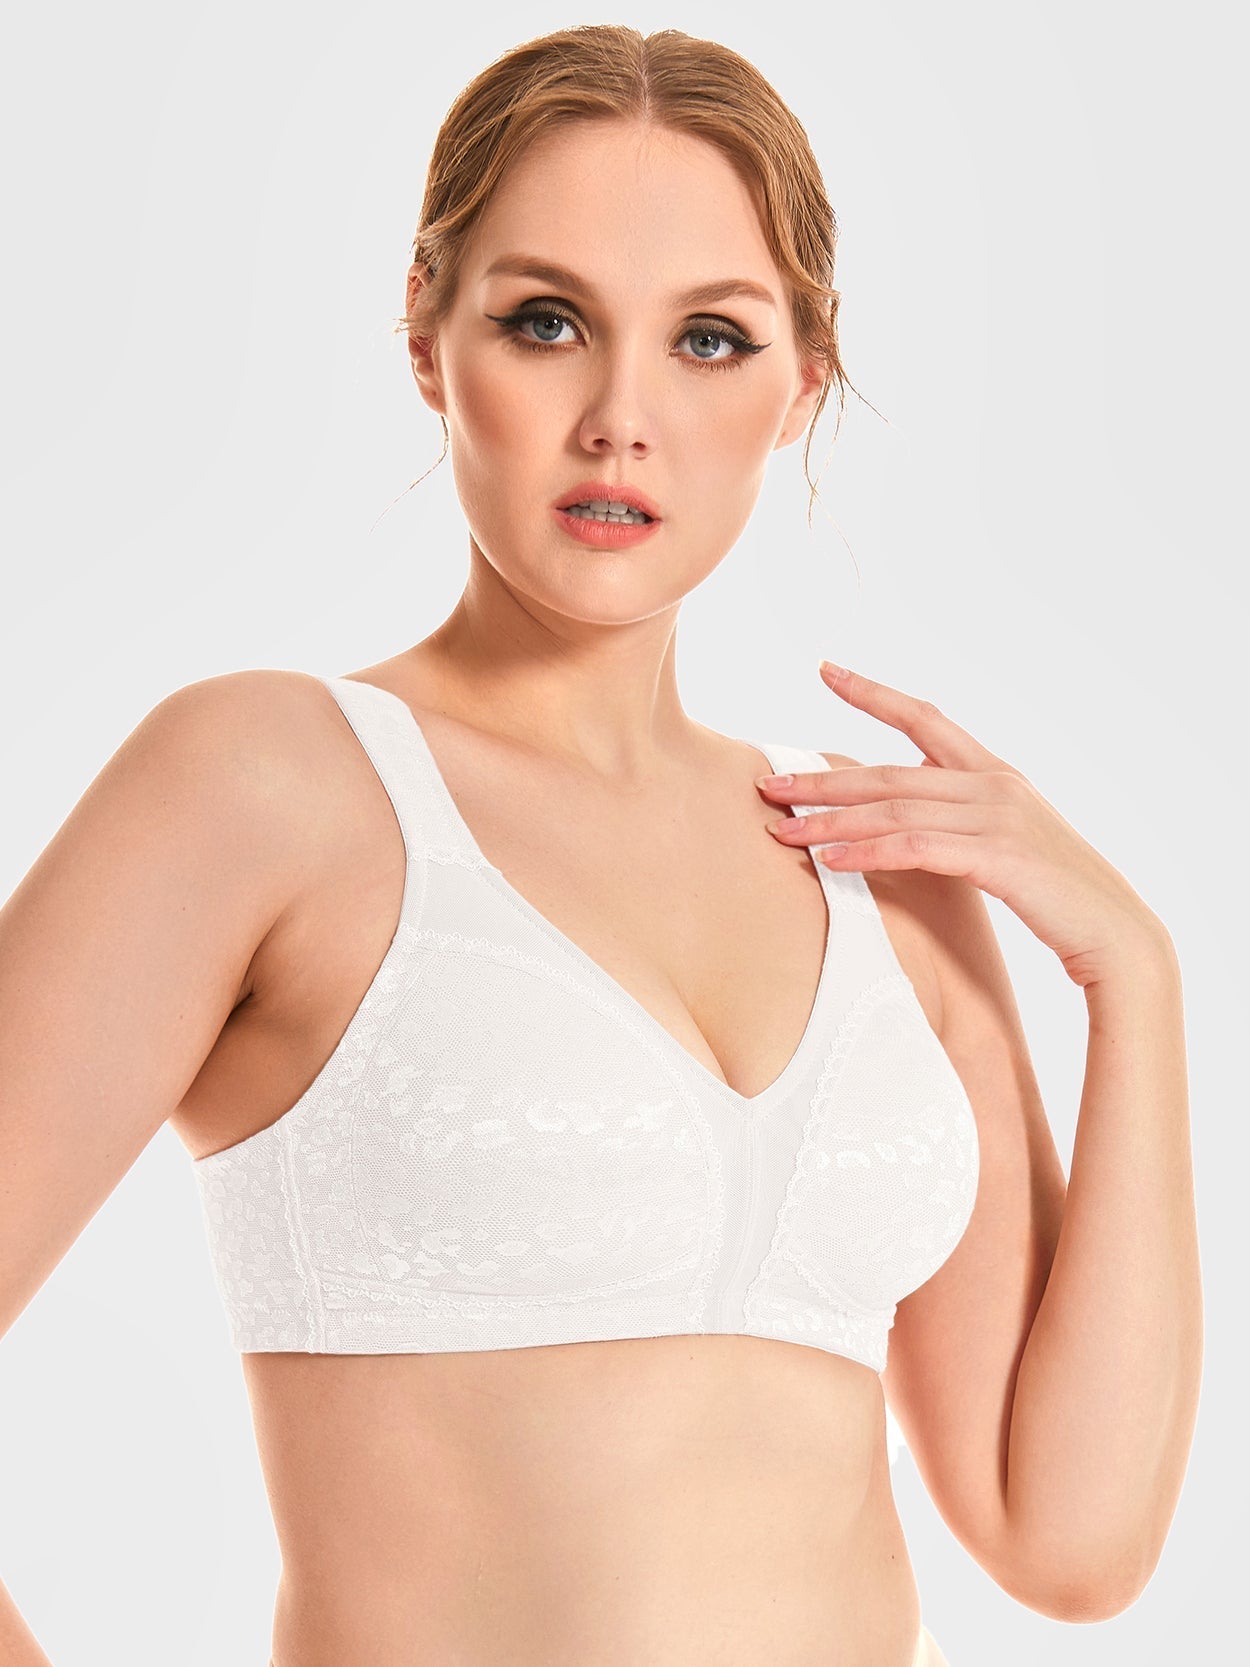 No Wire Big Breast Bra From 80b To 105c Big Size Seamless Push Up